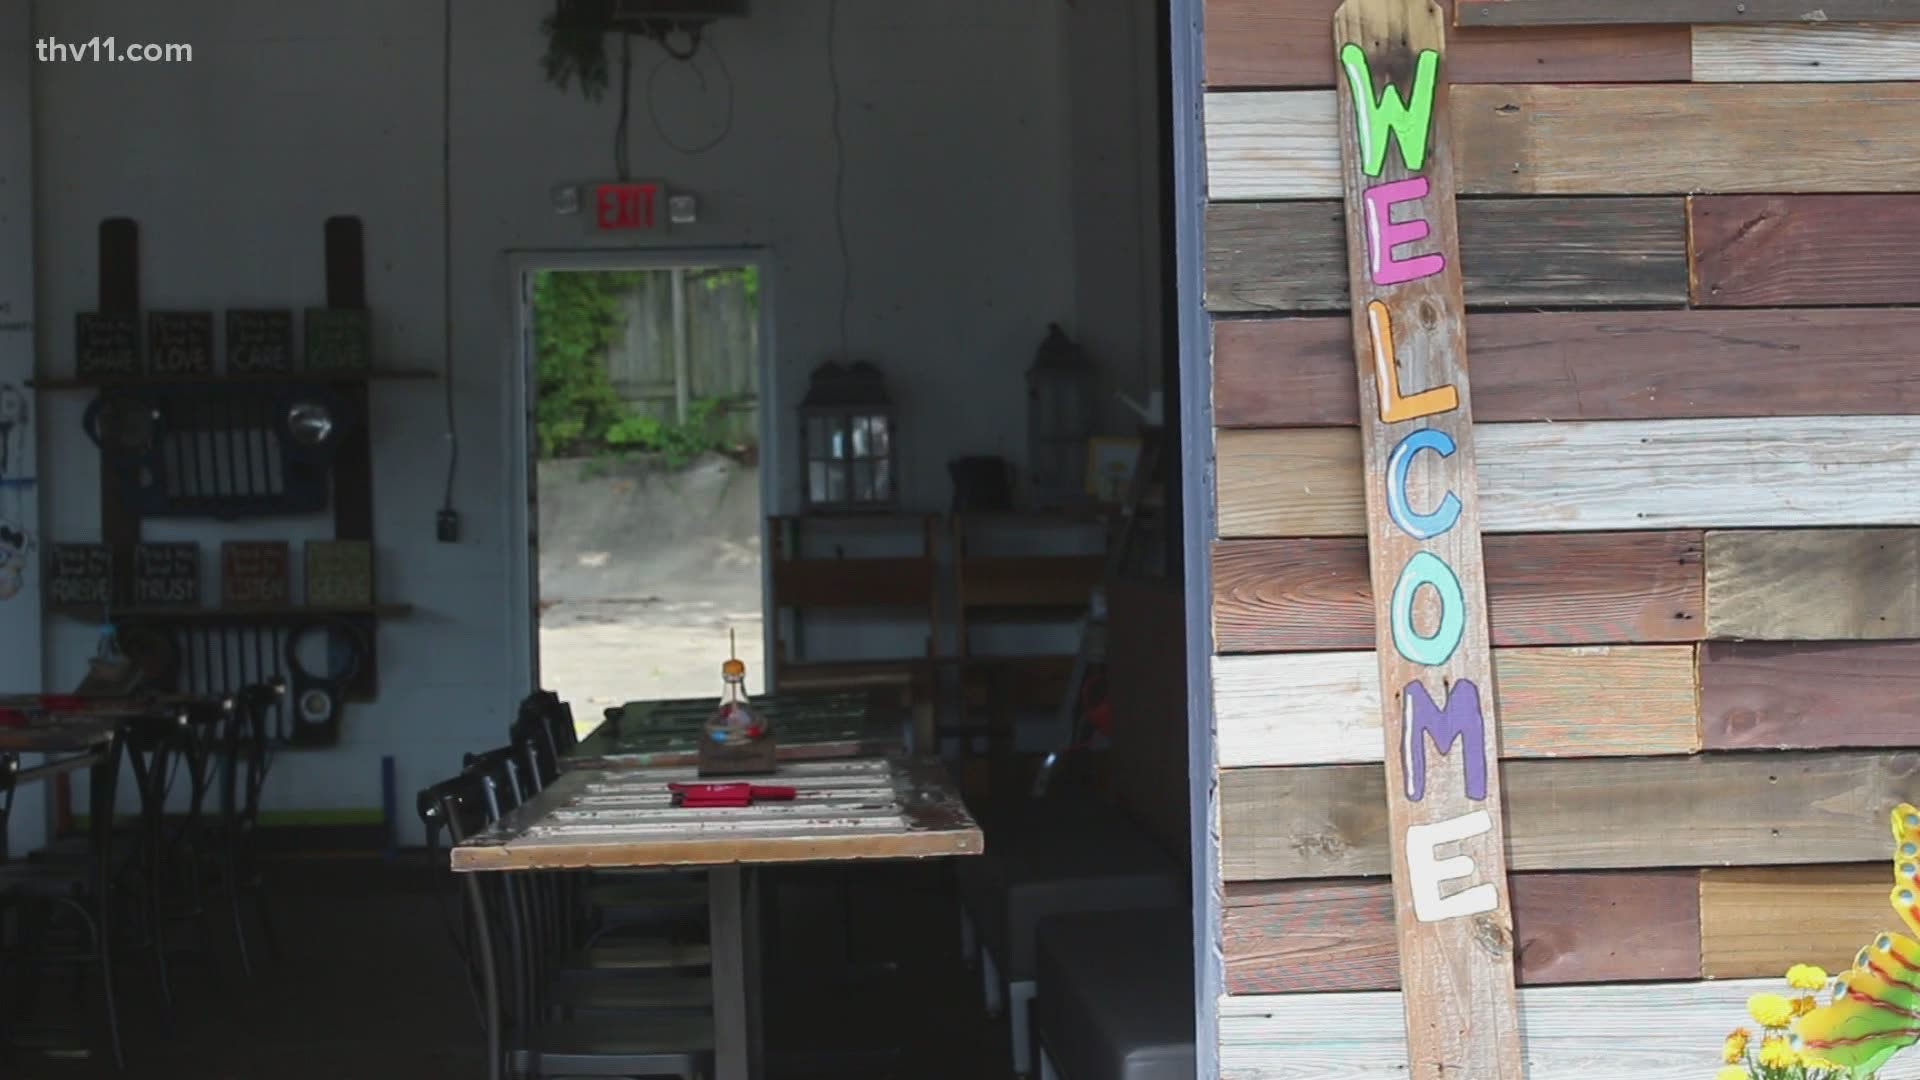 An Arkansas neighborhood is trying to highlight their local businesses.